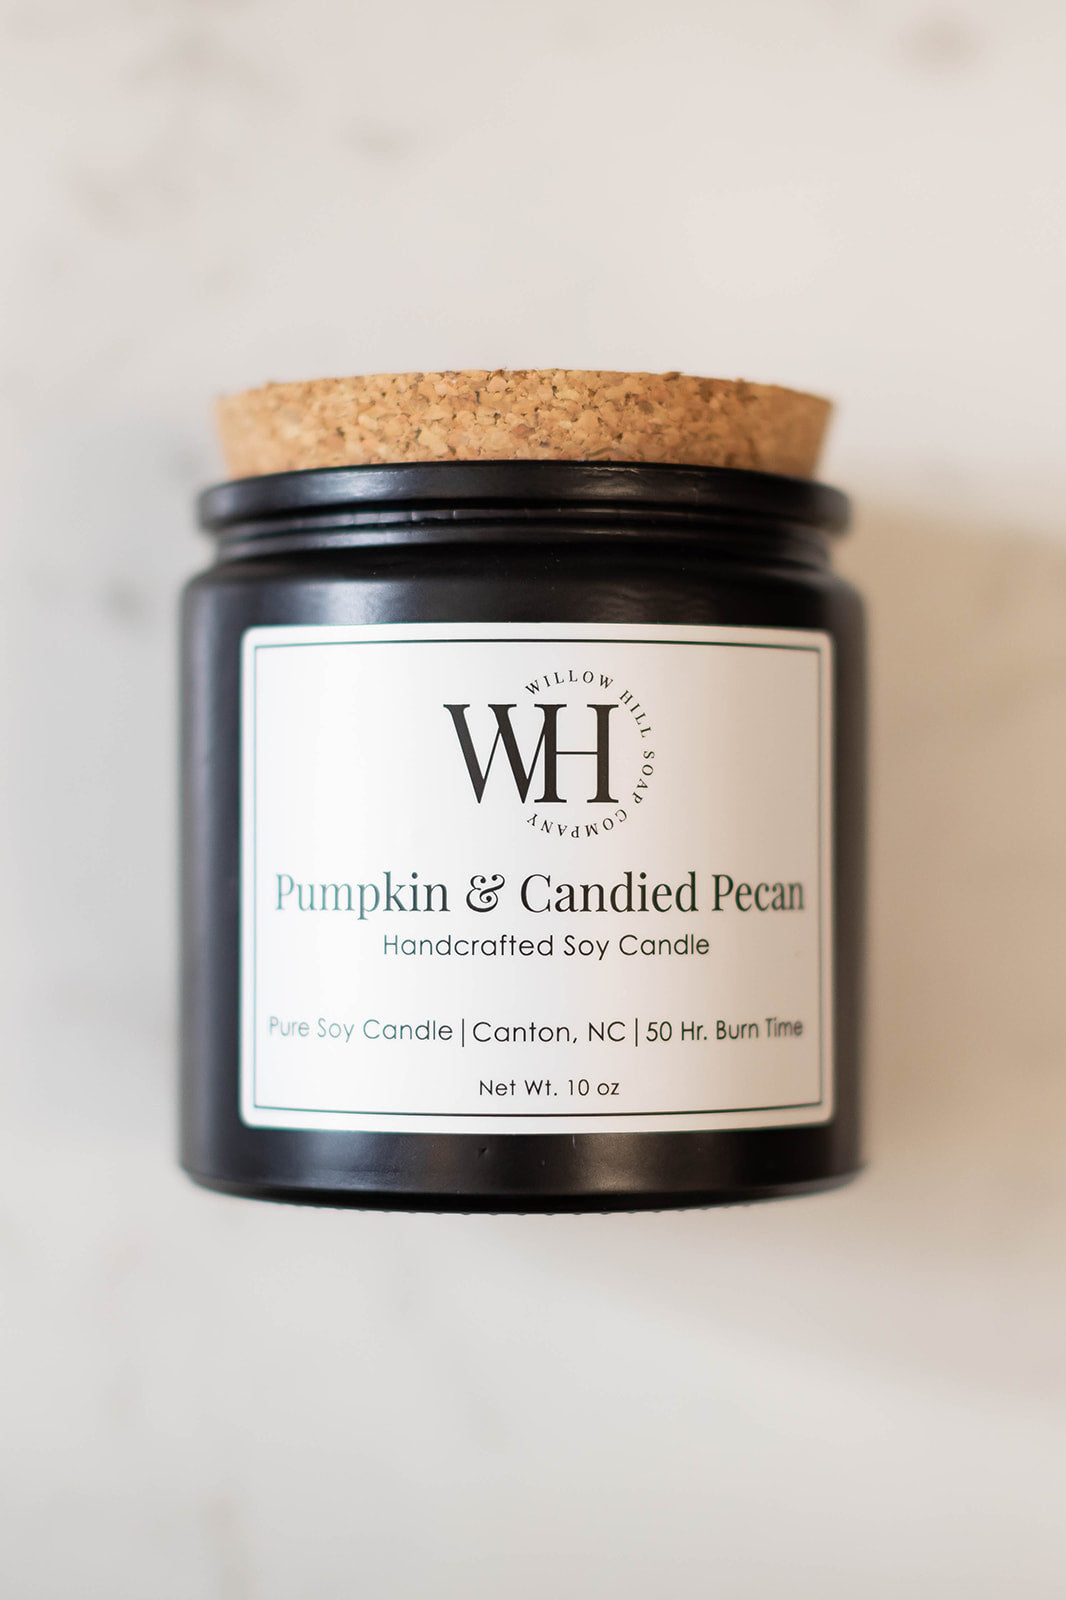 Pumpkin & Candied Pecan Soy Candle